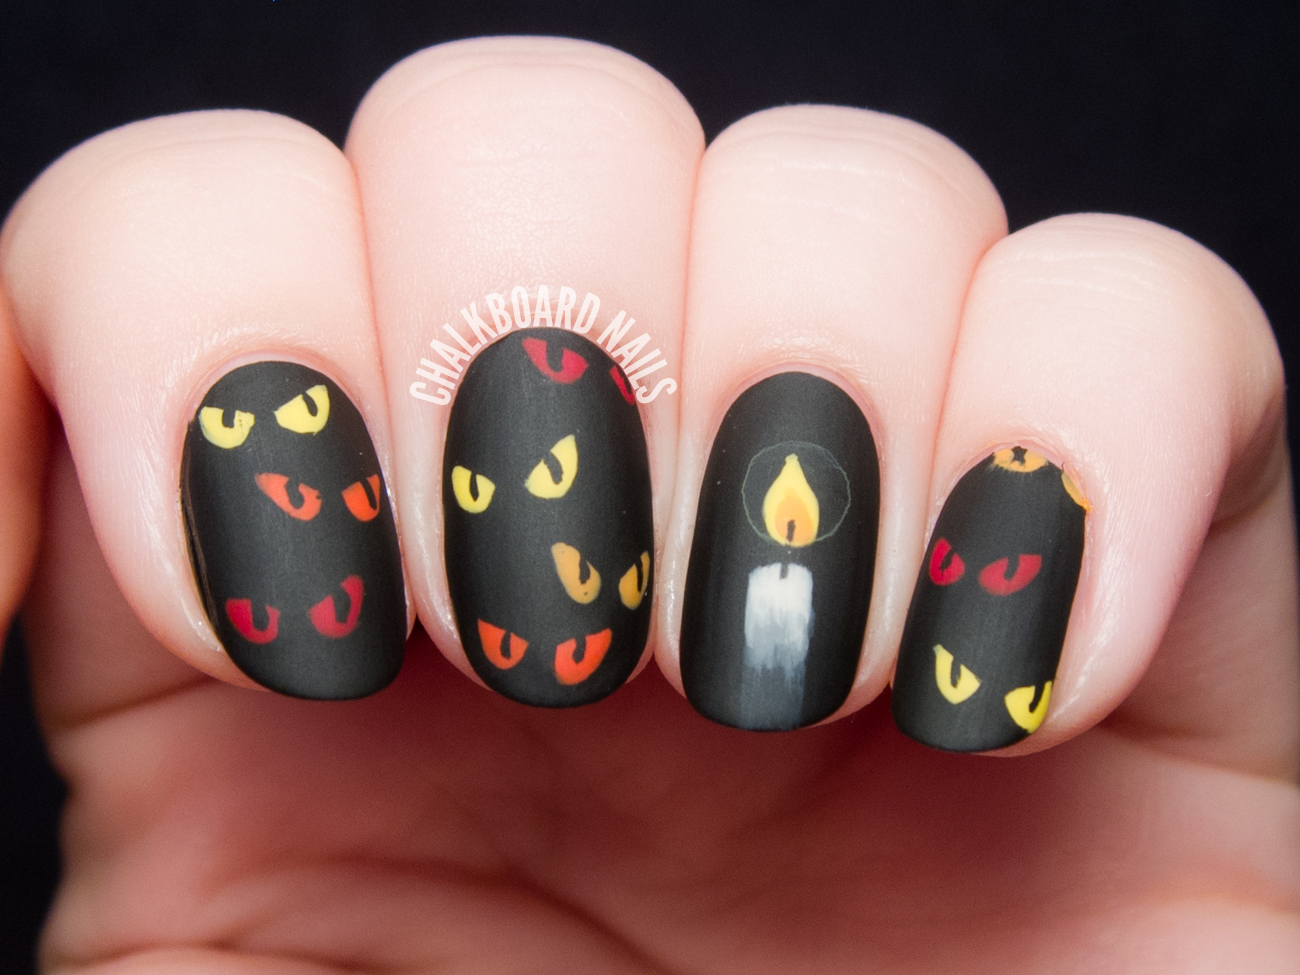 Are You Afraid of the Dark? - Spooky Eyes Nail Art | Chalkboard Nails